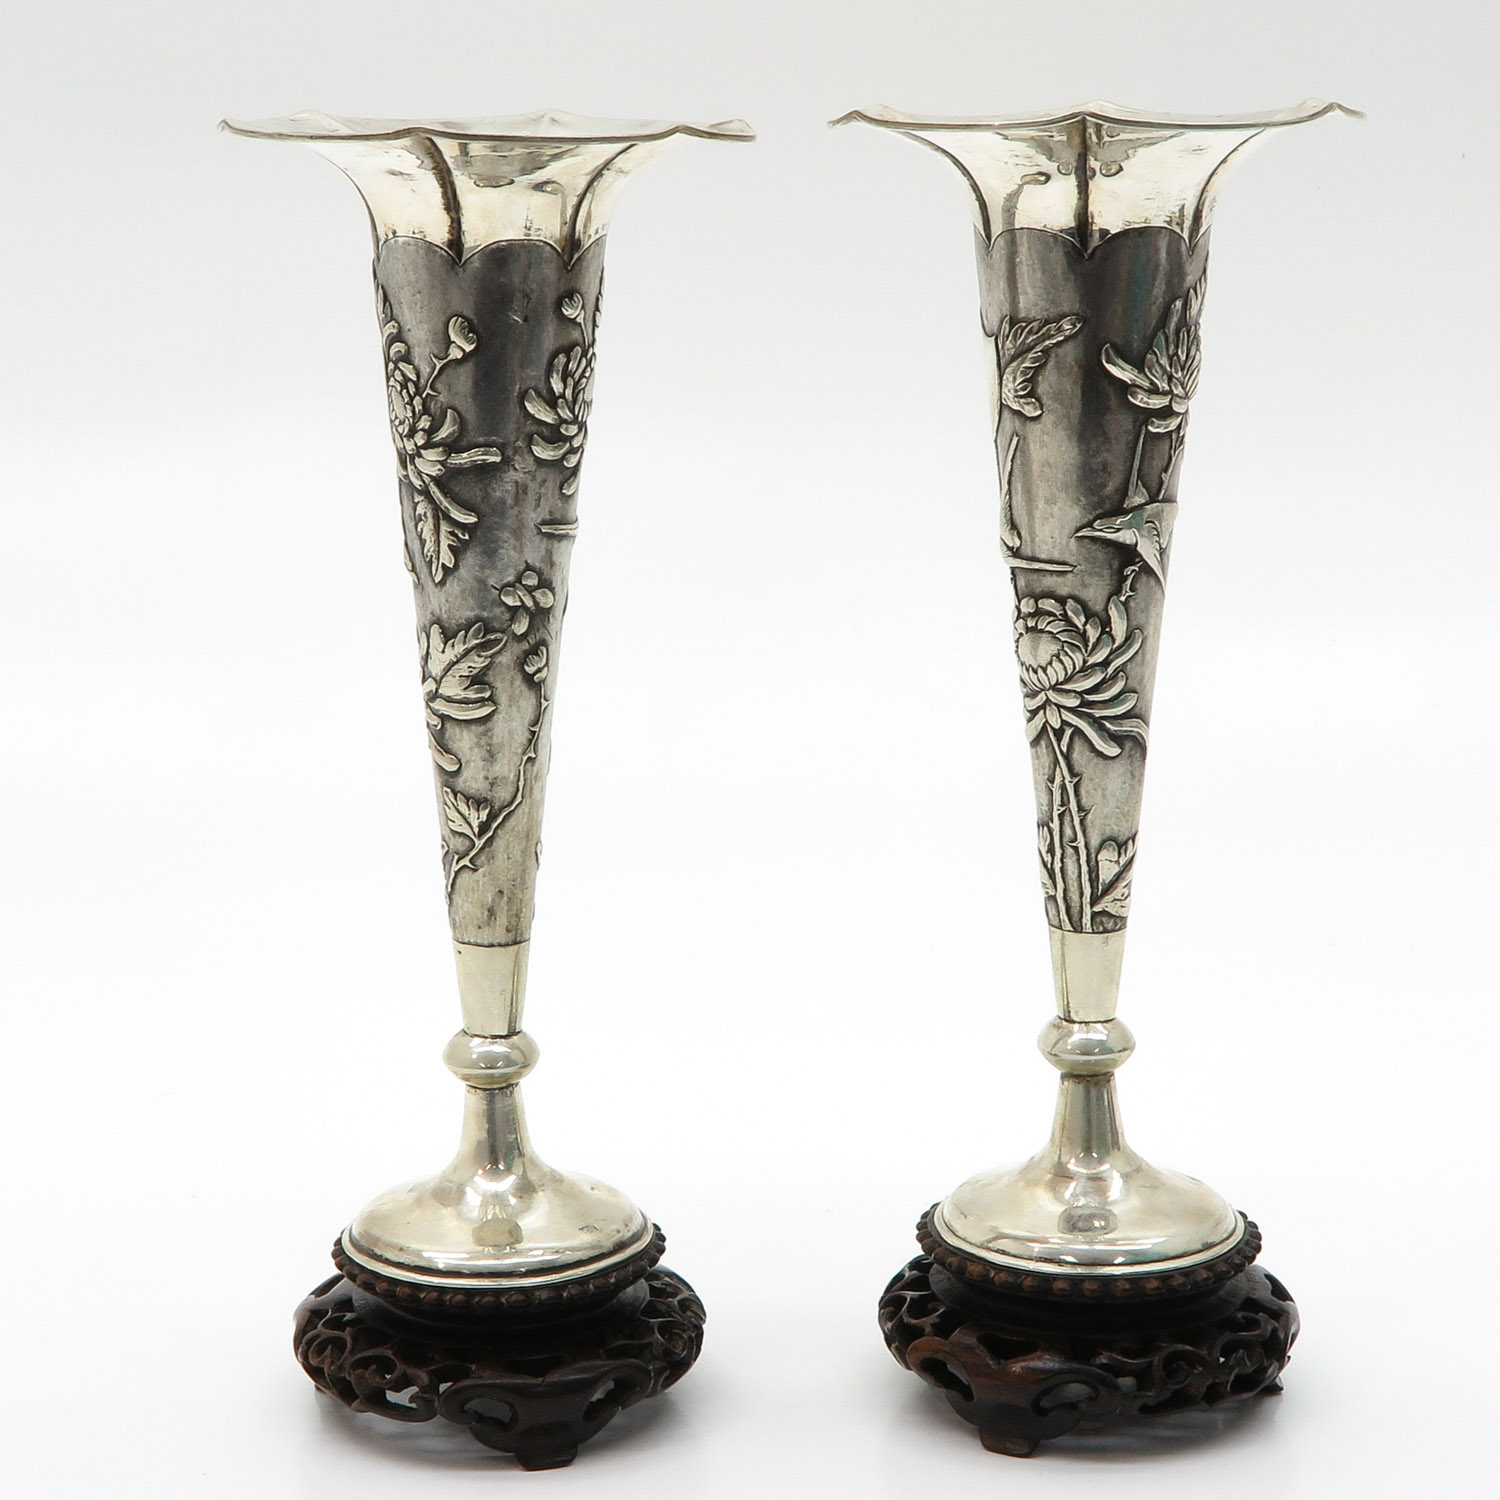 Lot of 2 Chinese Silver Vases - Image 2 of 7